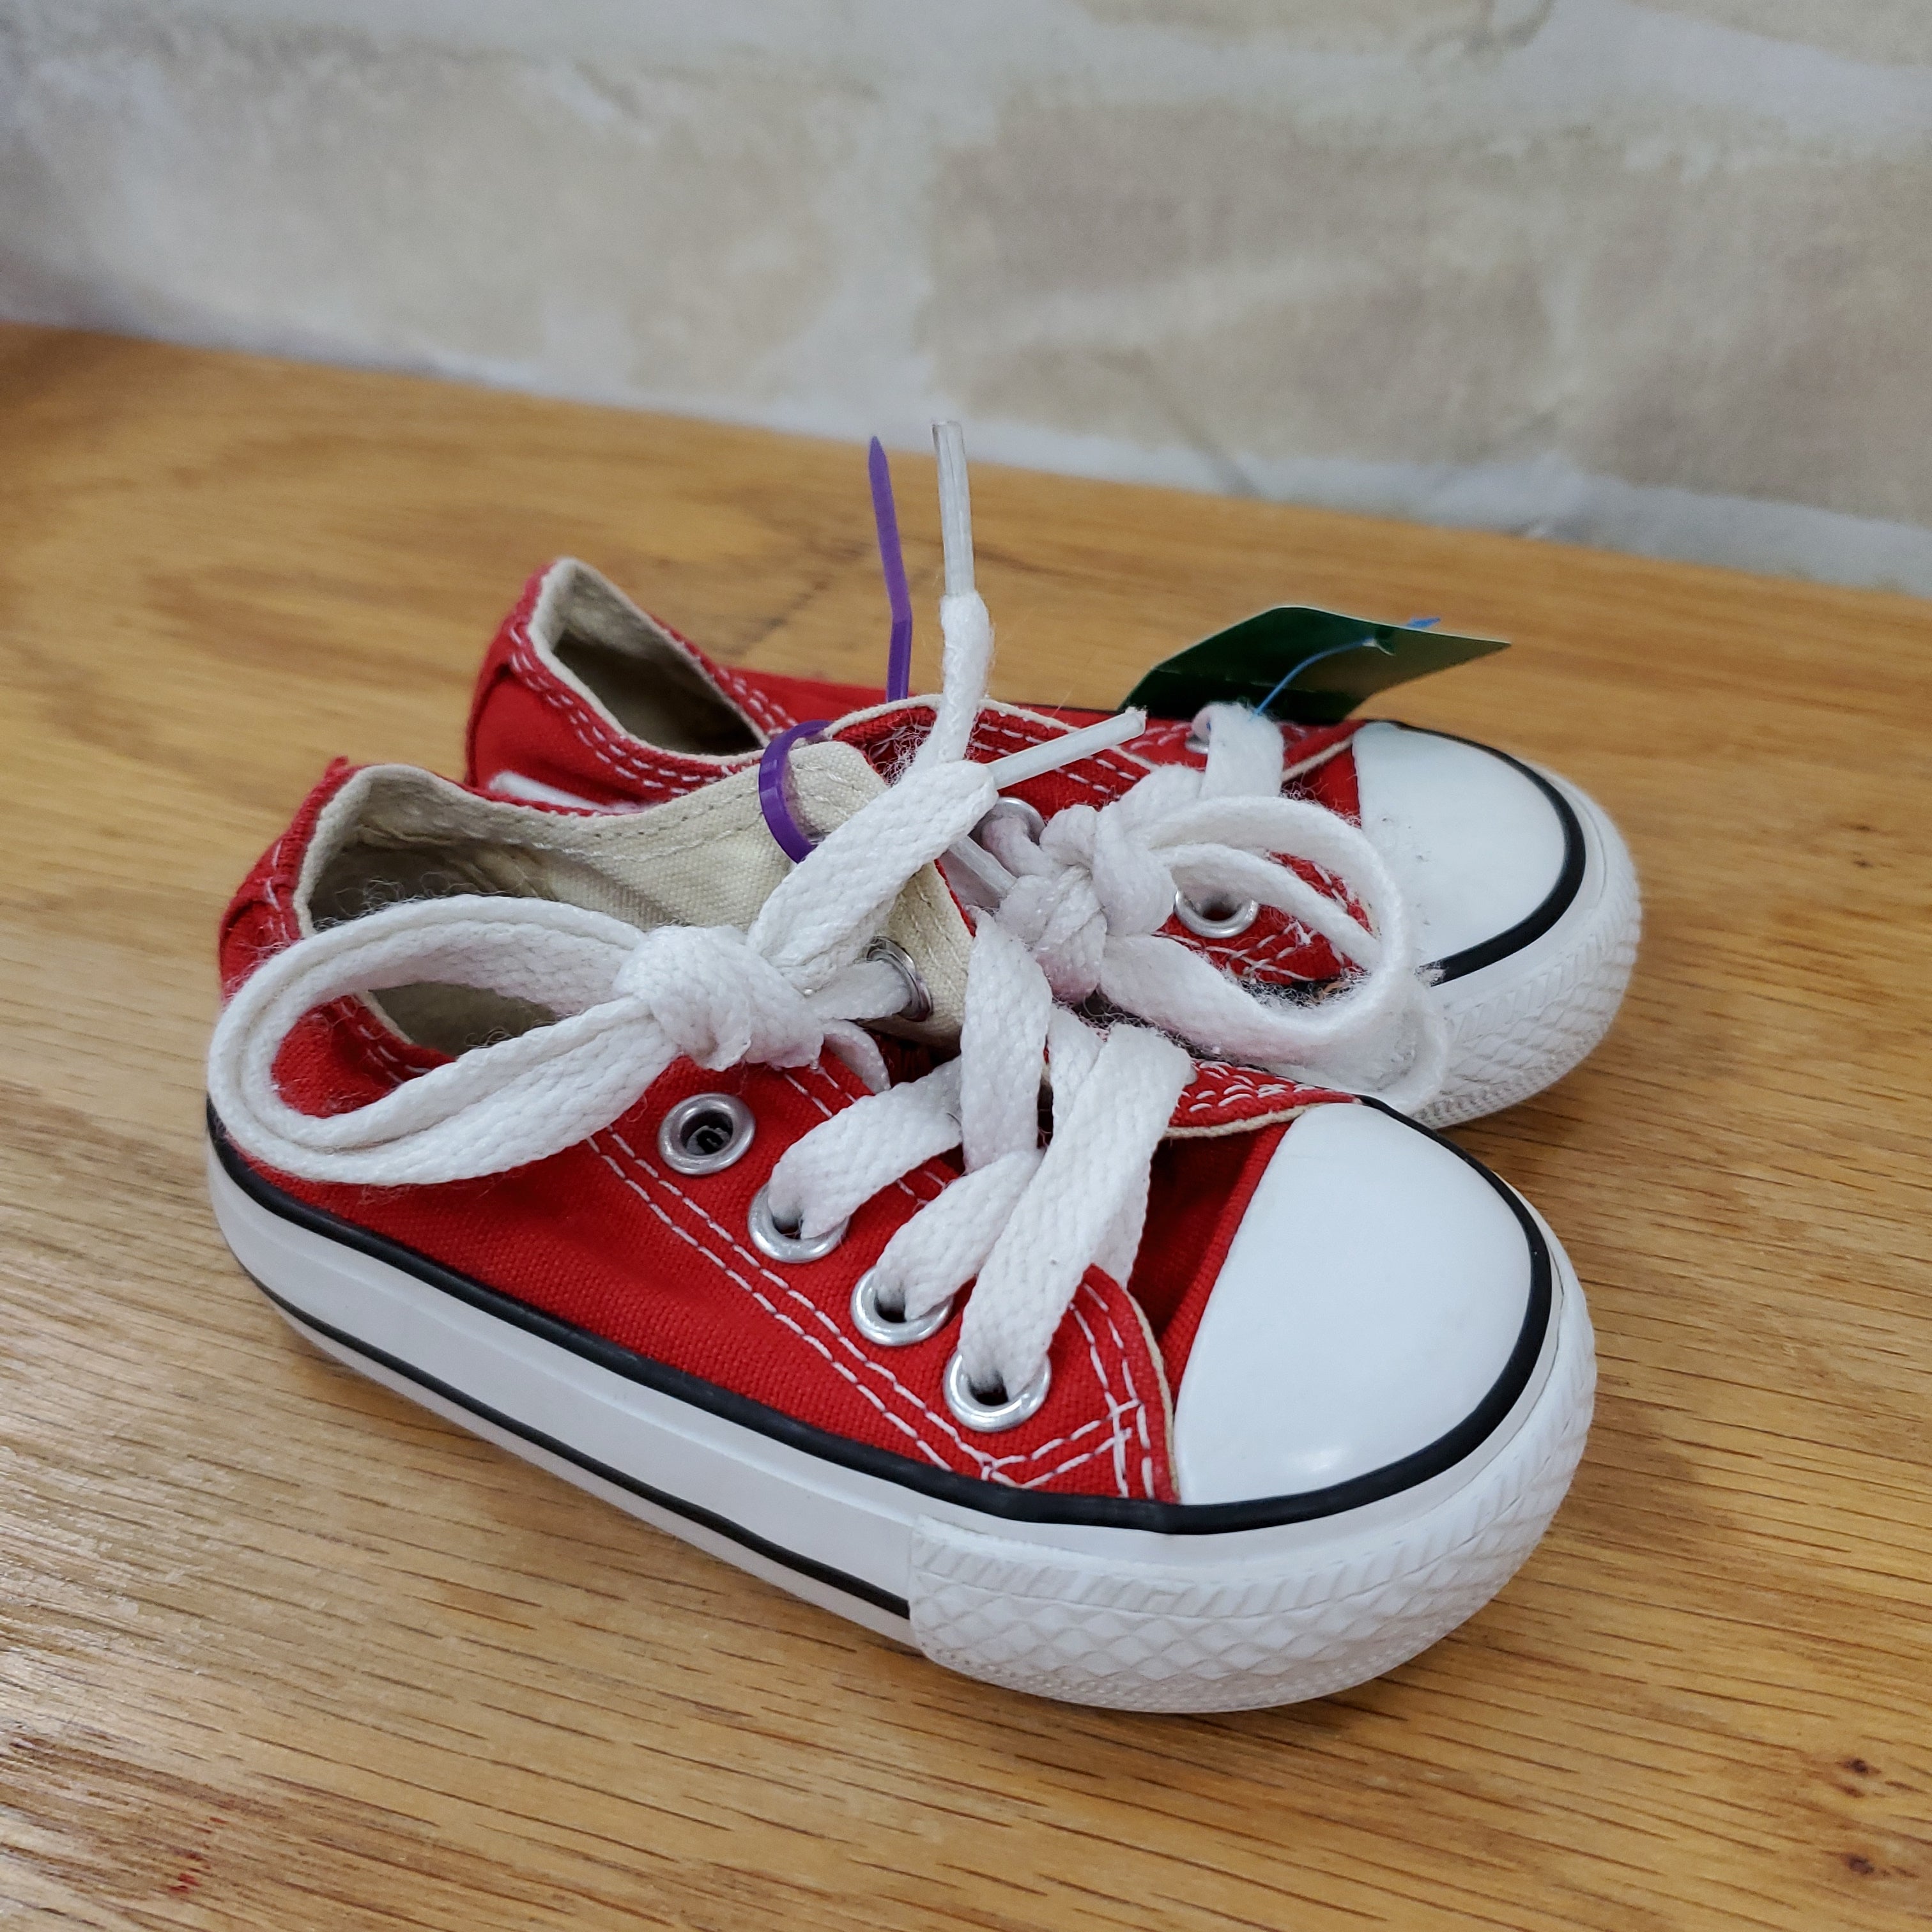 Converse girls or boys red tennis shoes tie 3